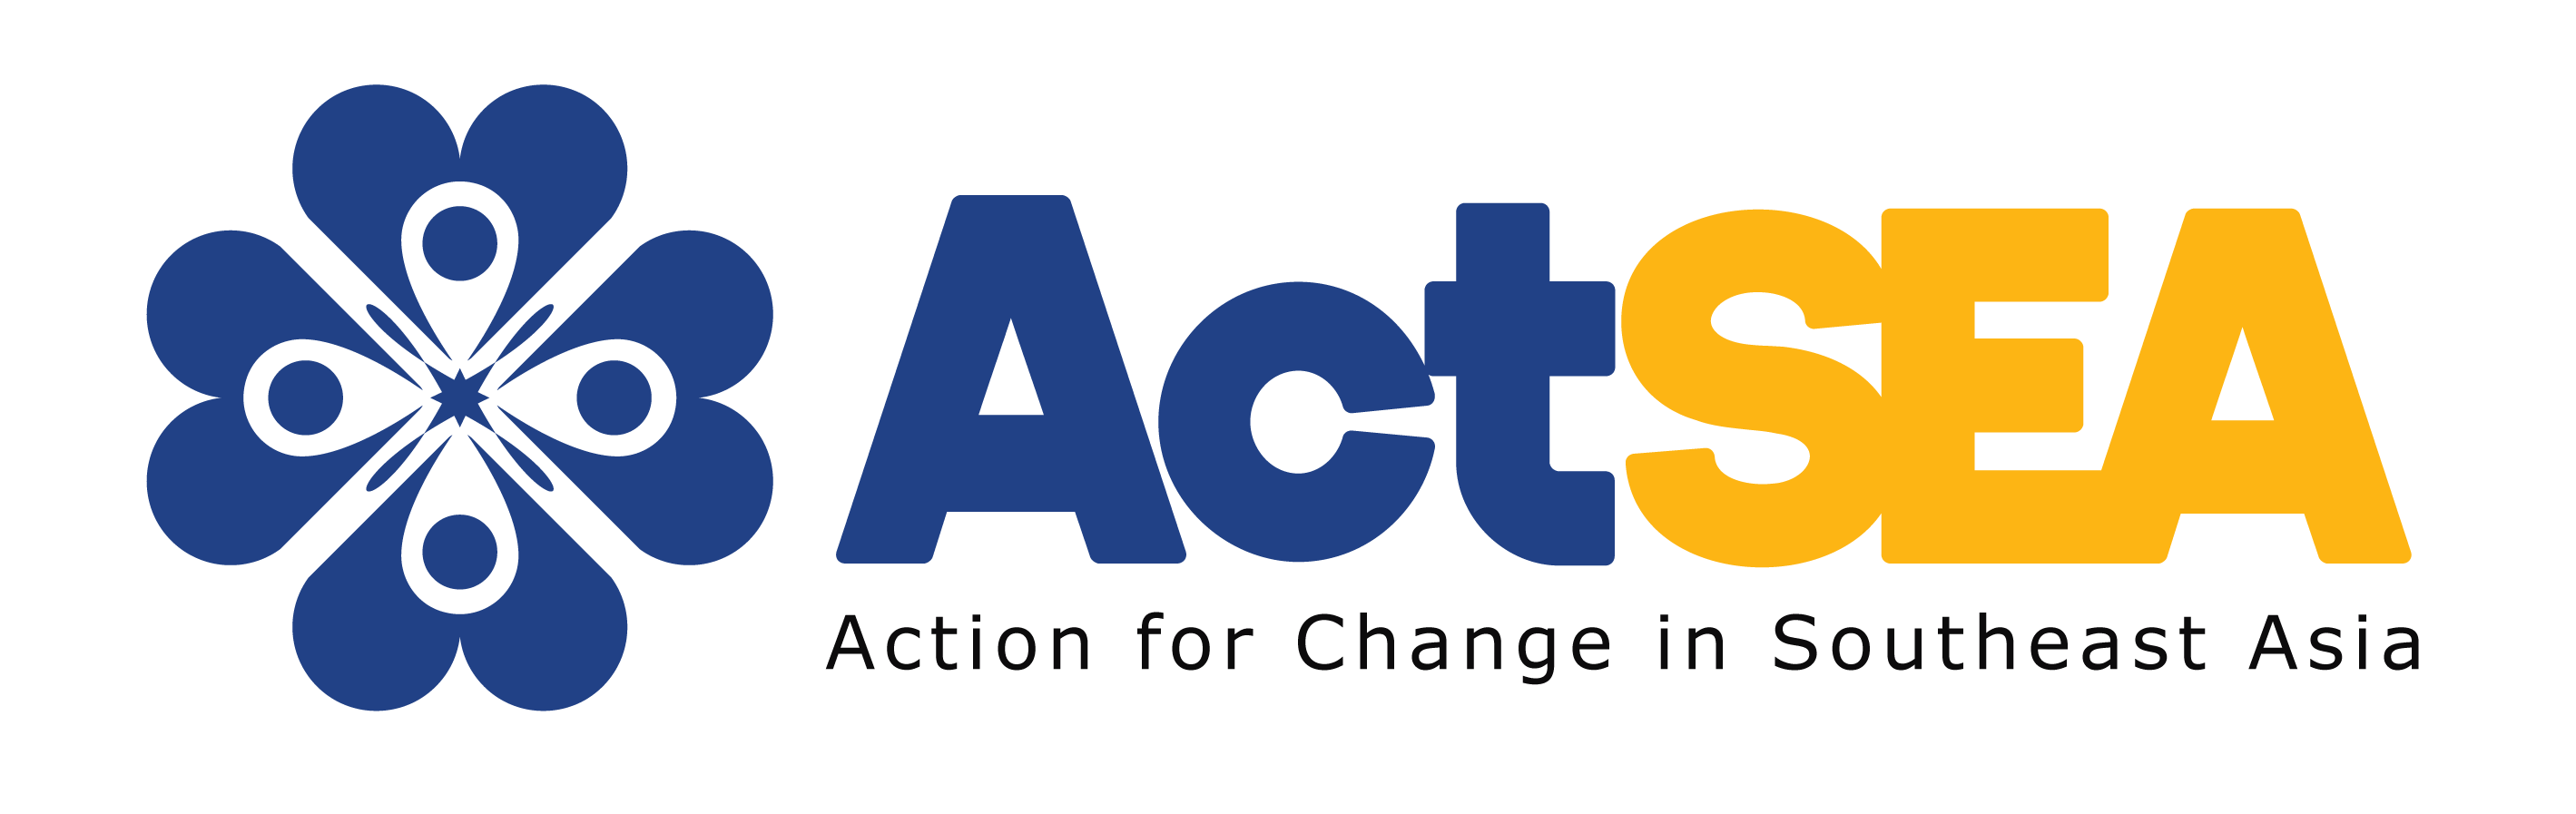 Action For Change In Southeast Asia Limited logo